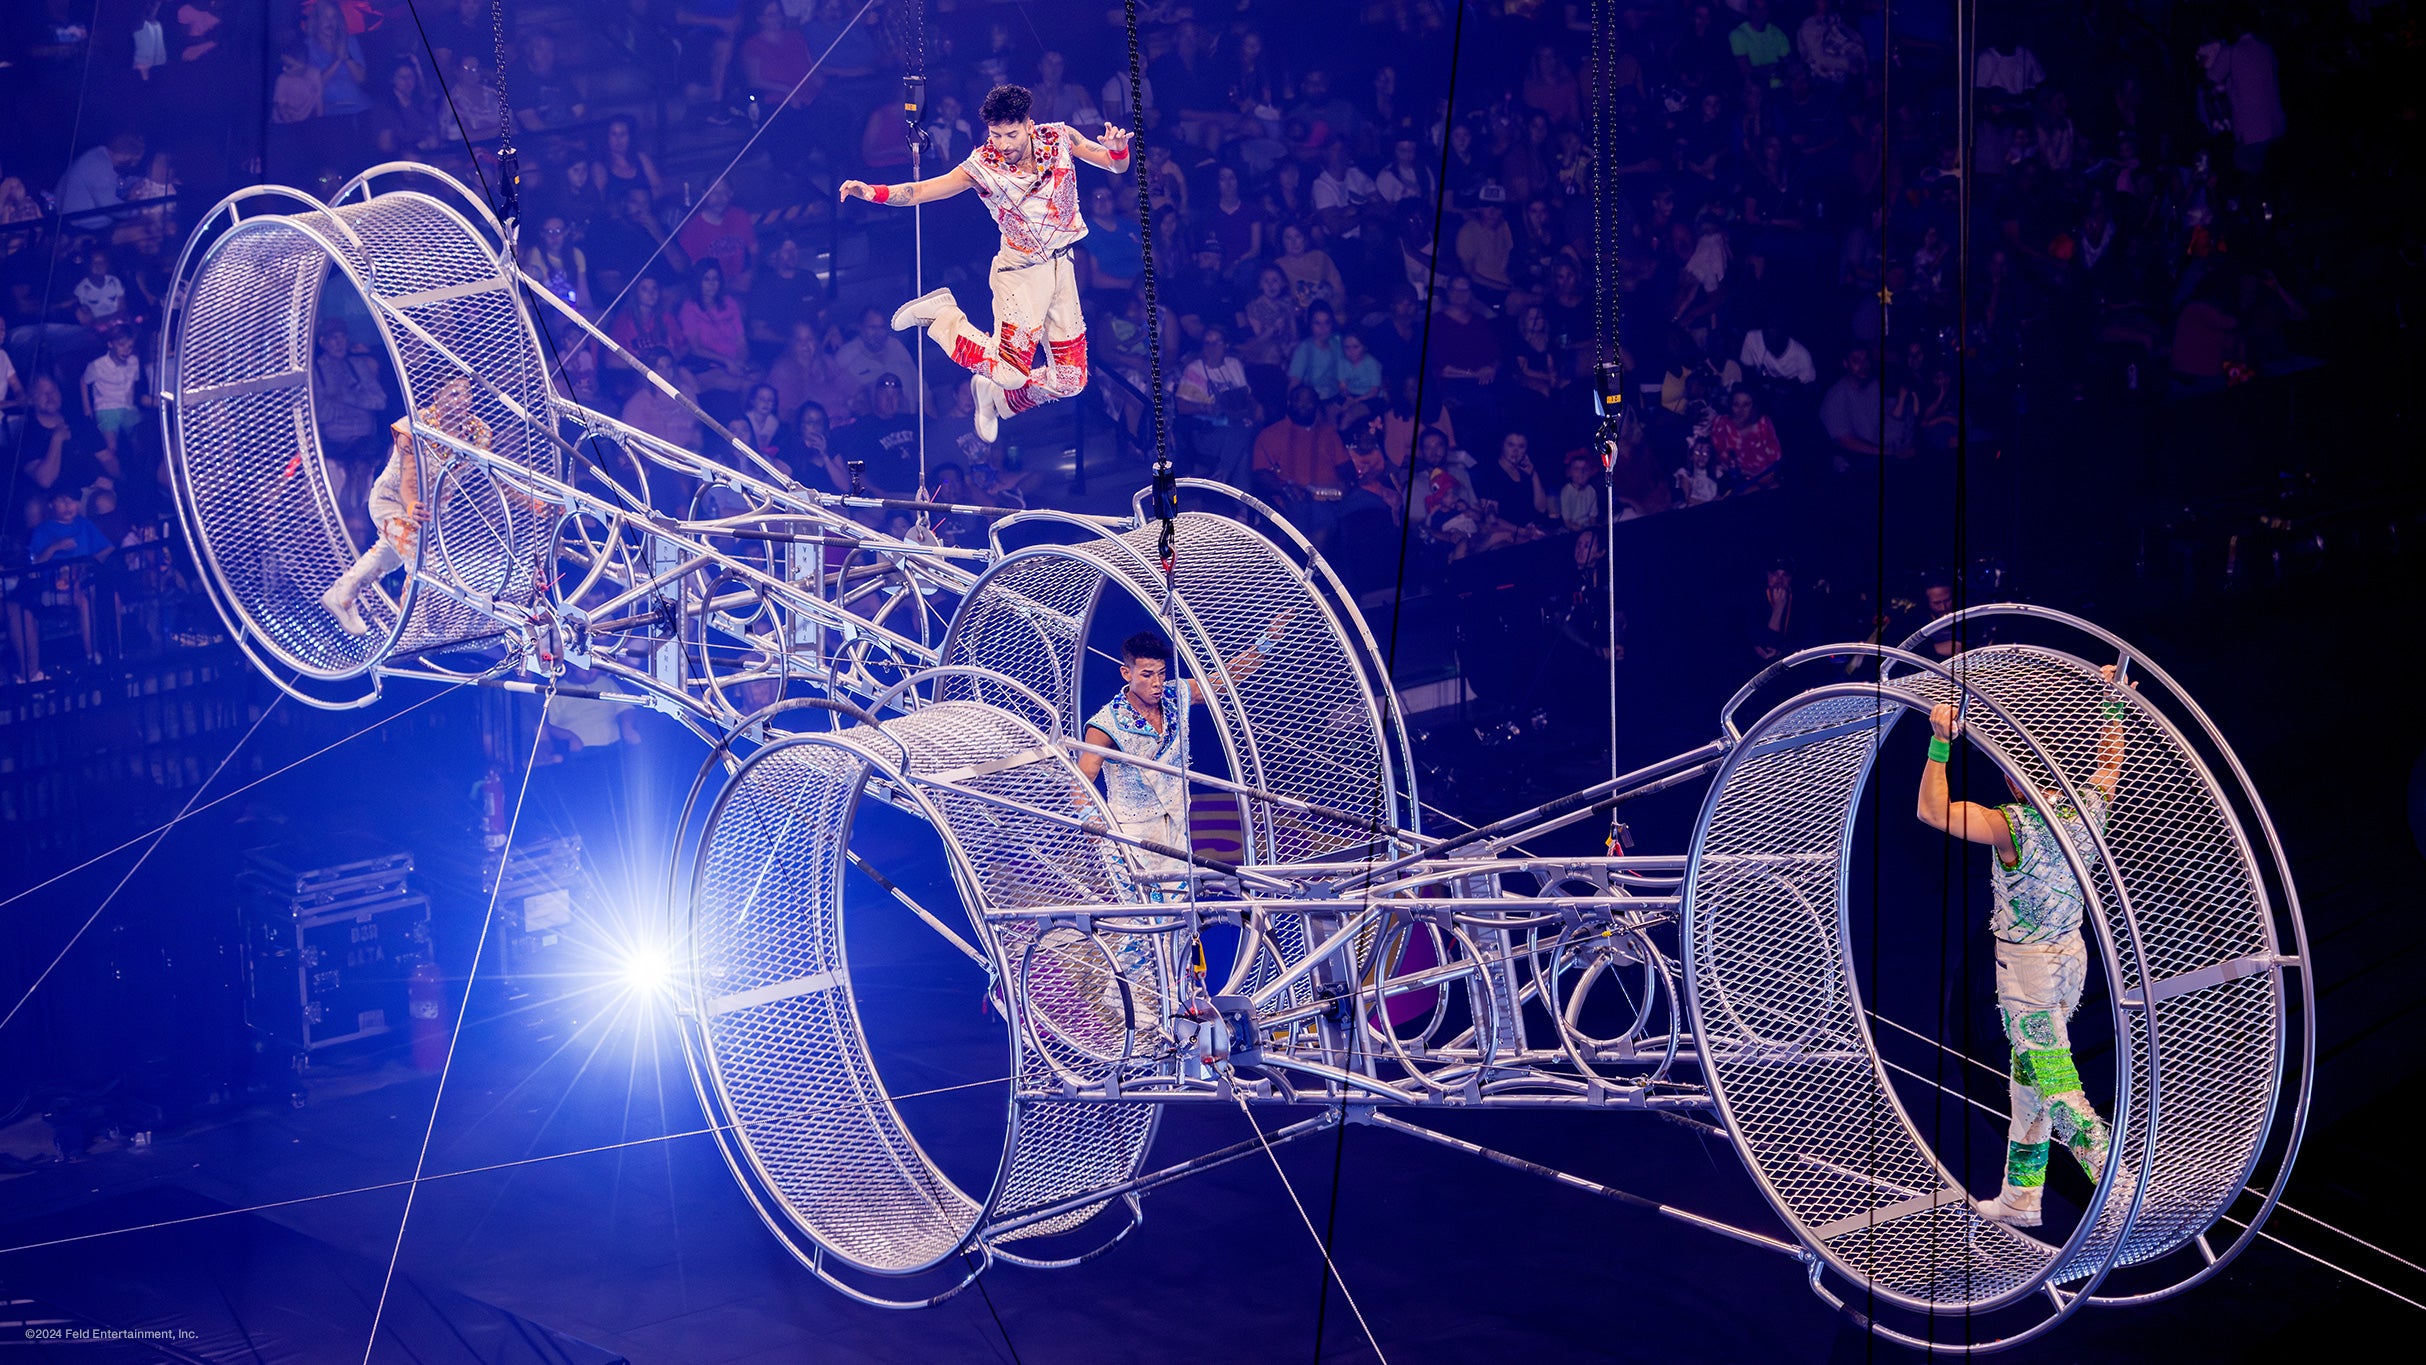 Ringling Bros. and Barnum & Bailey presents The Greatest Show On Earth presales in San Antonio